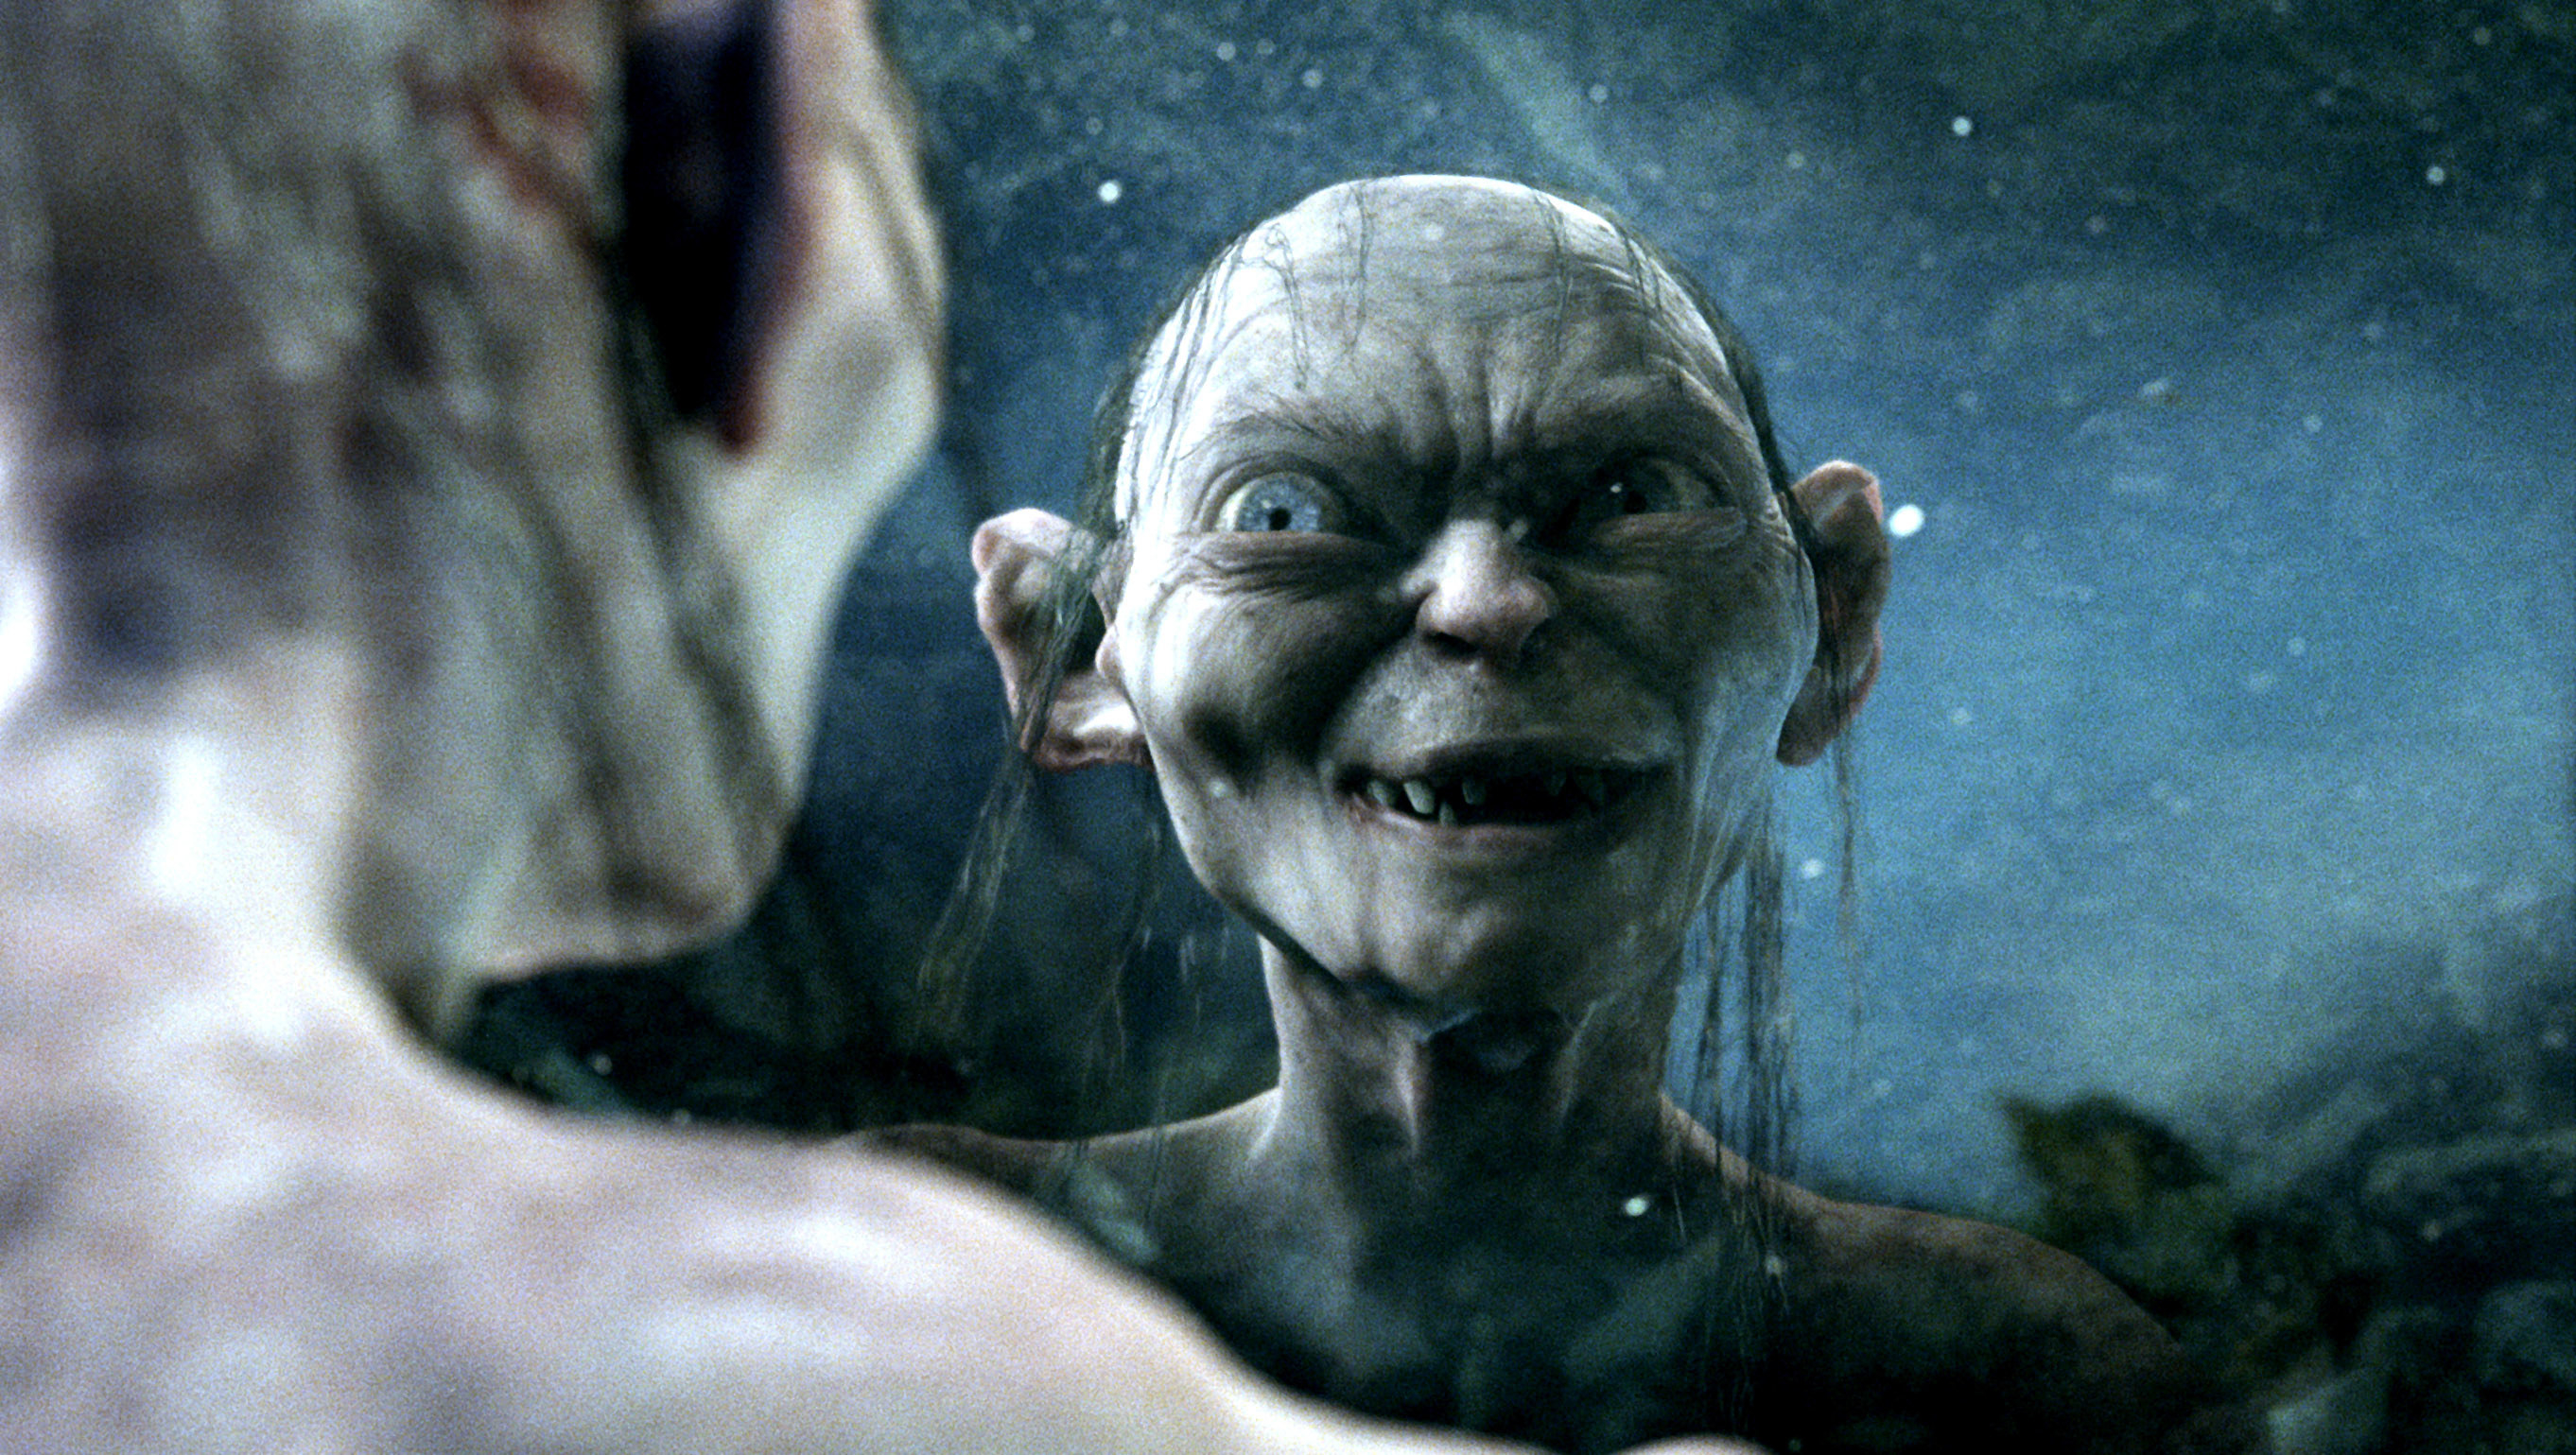 21 Details You Might Have Missed in 'the Lord of the Rings' Movies